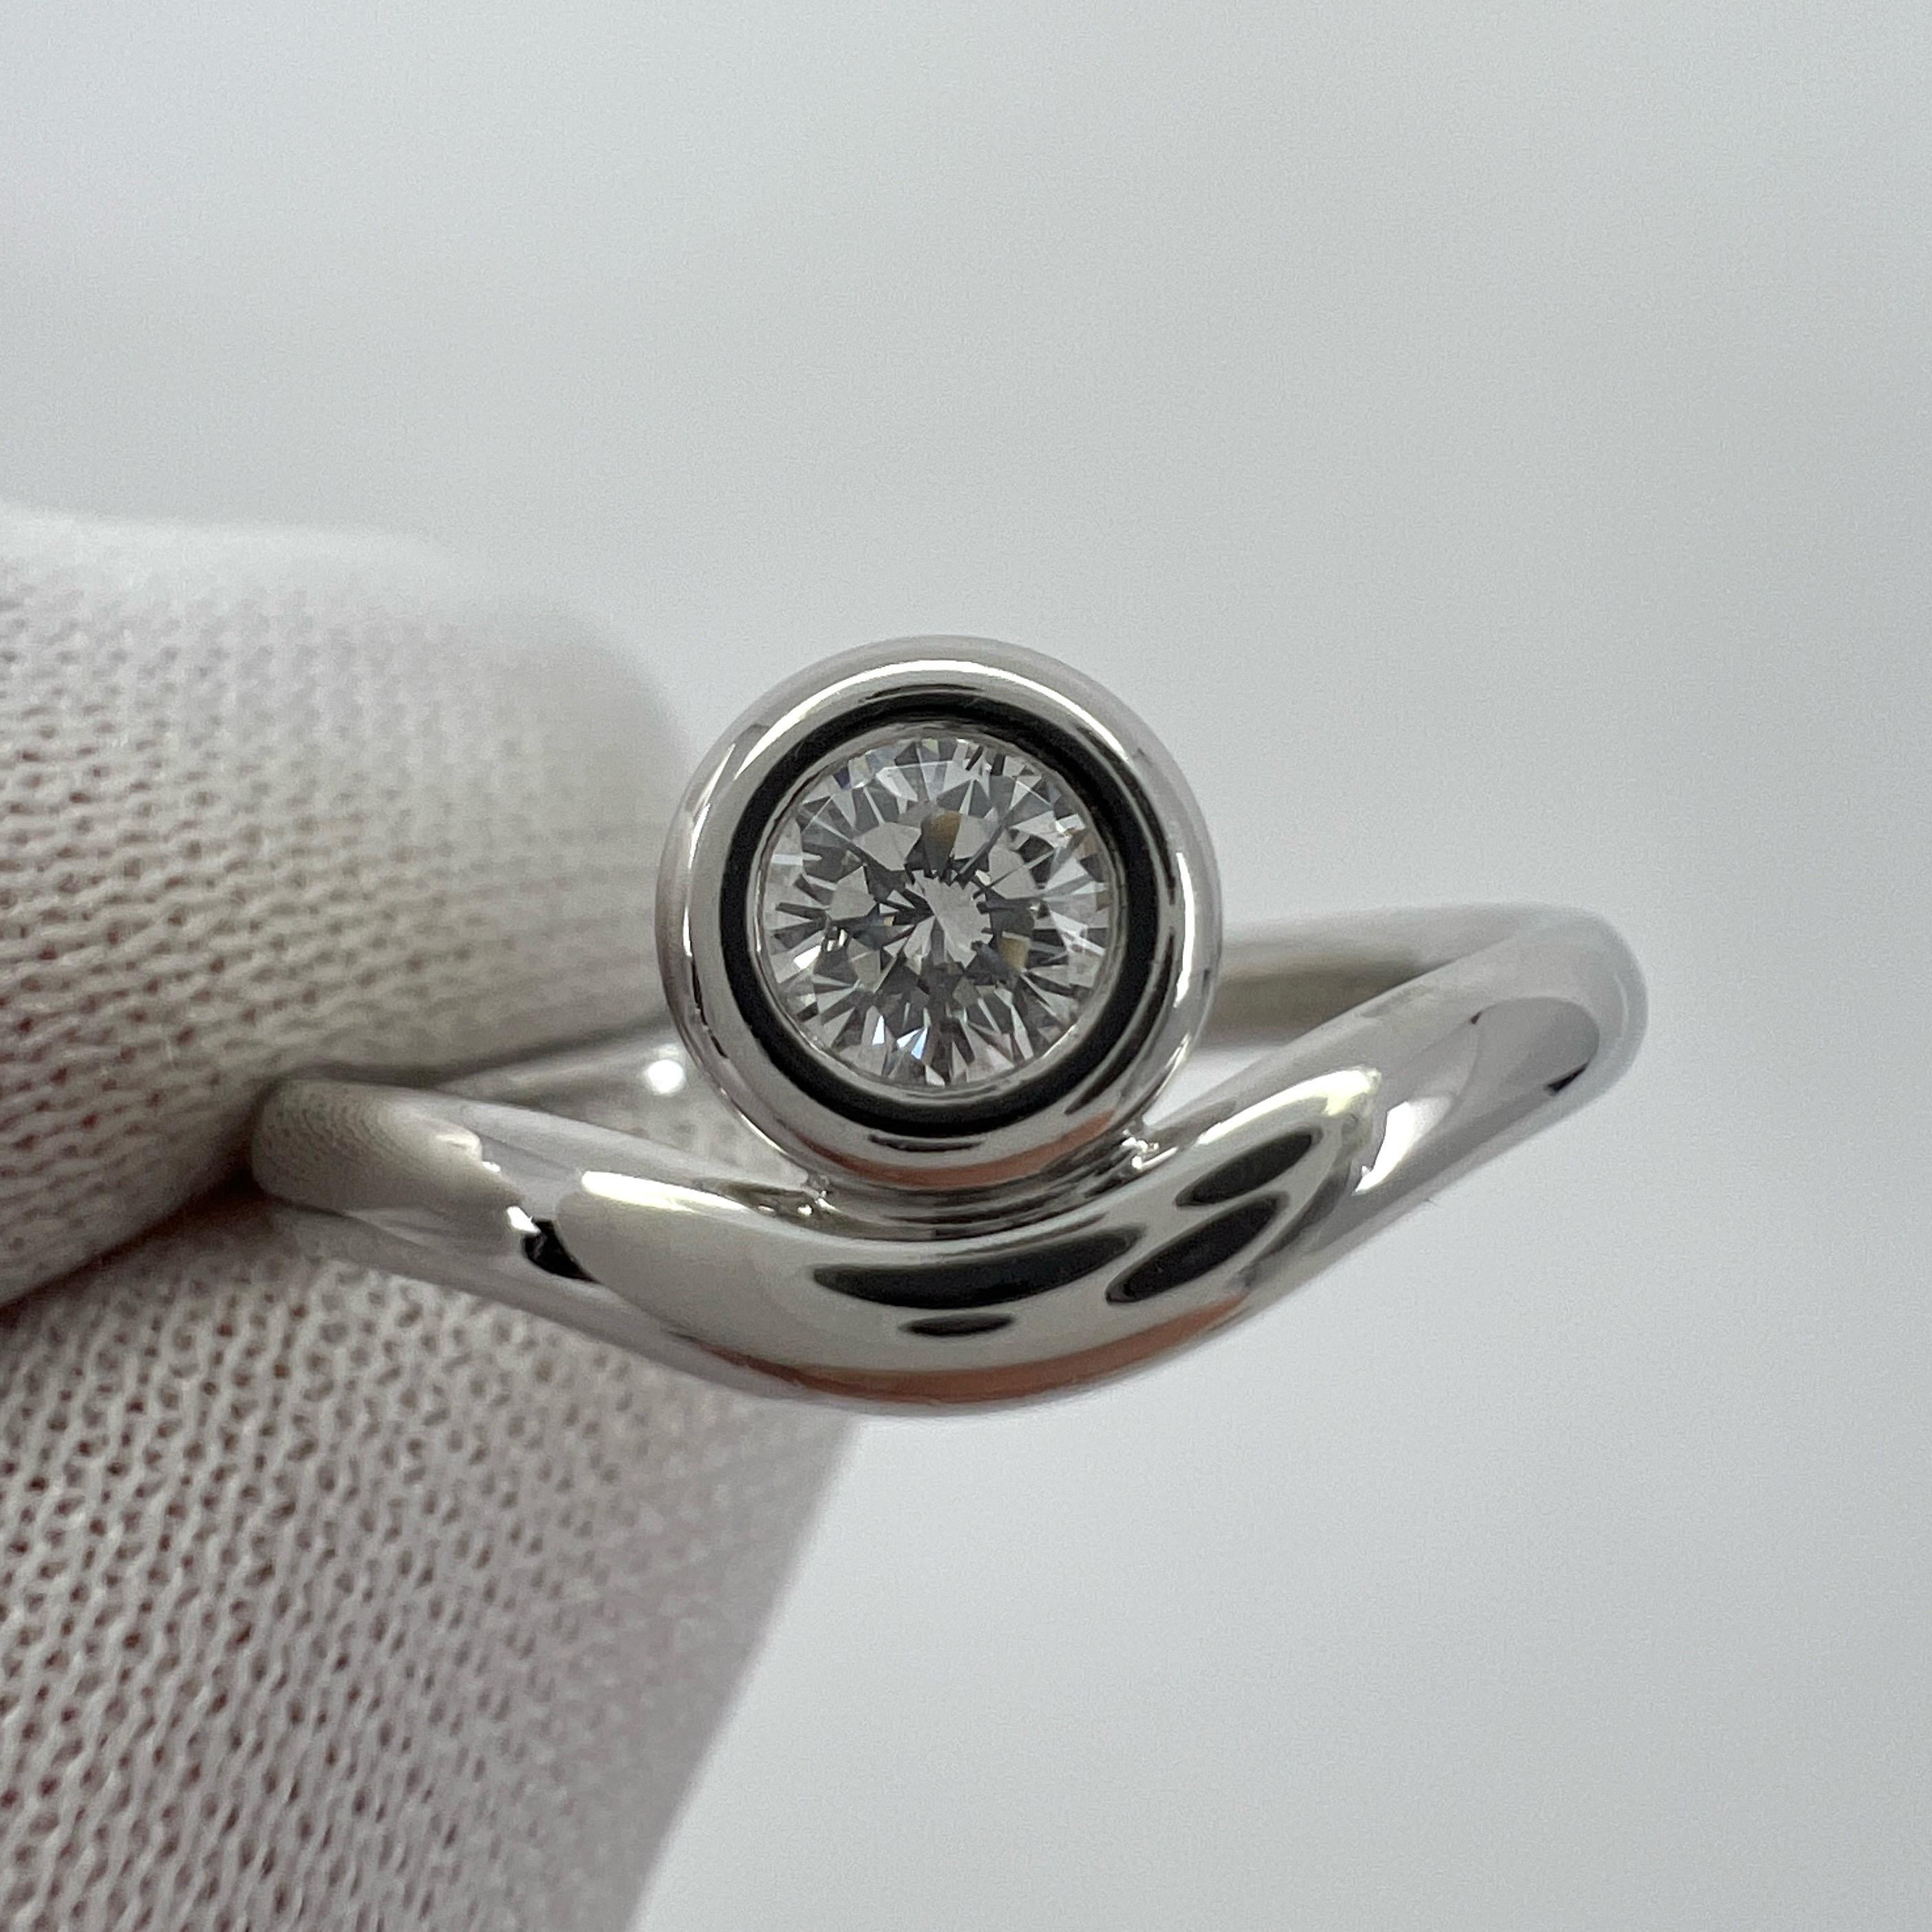 Vintage Tiffany & Co. Round Cut Diamond By The Yard 950 Platinum Solitaire Ring For Sale 6